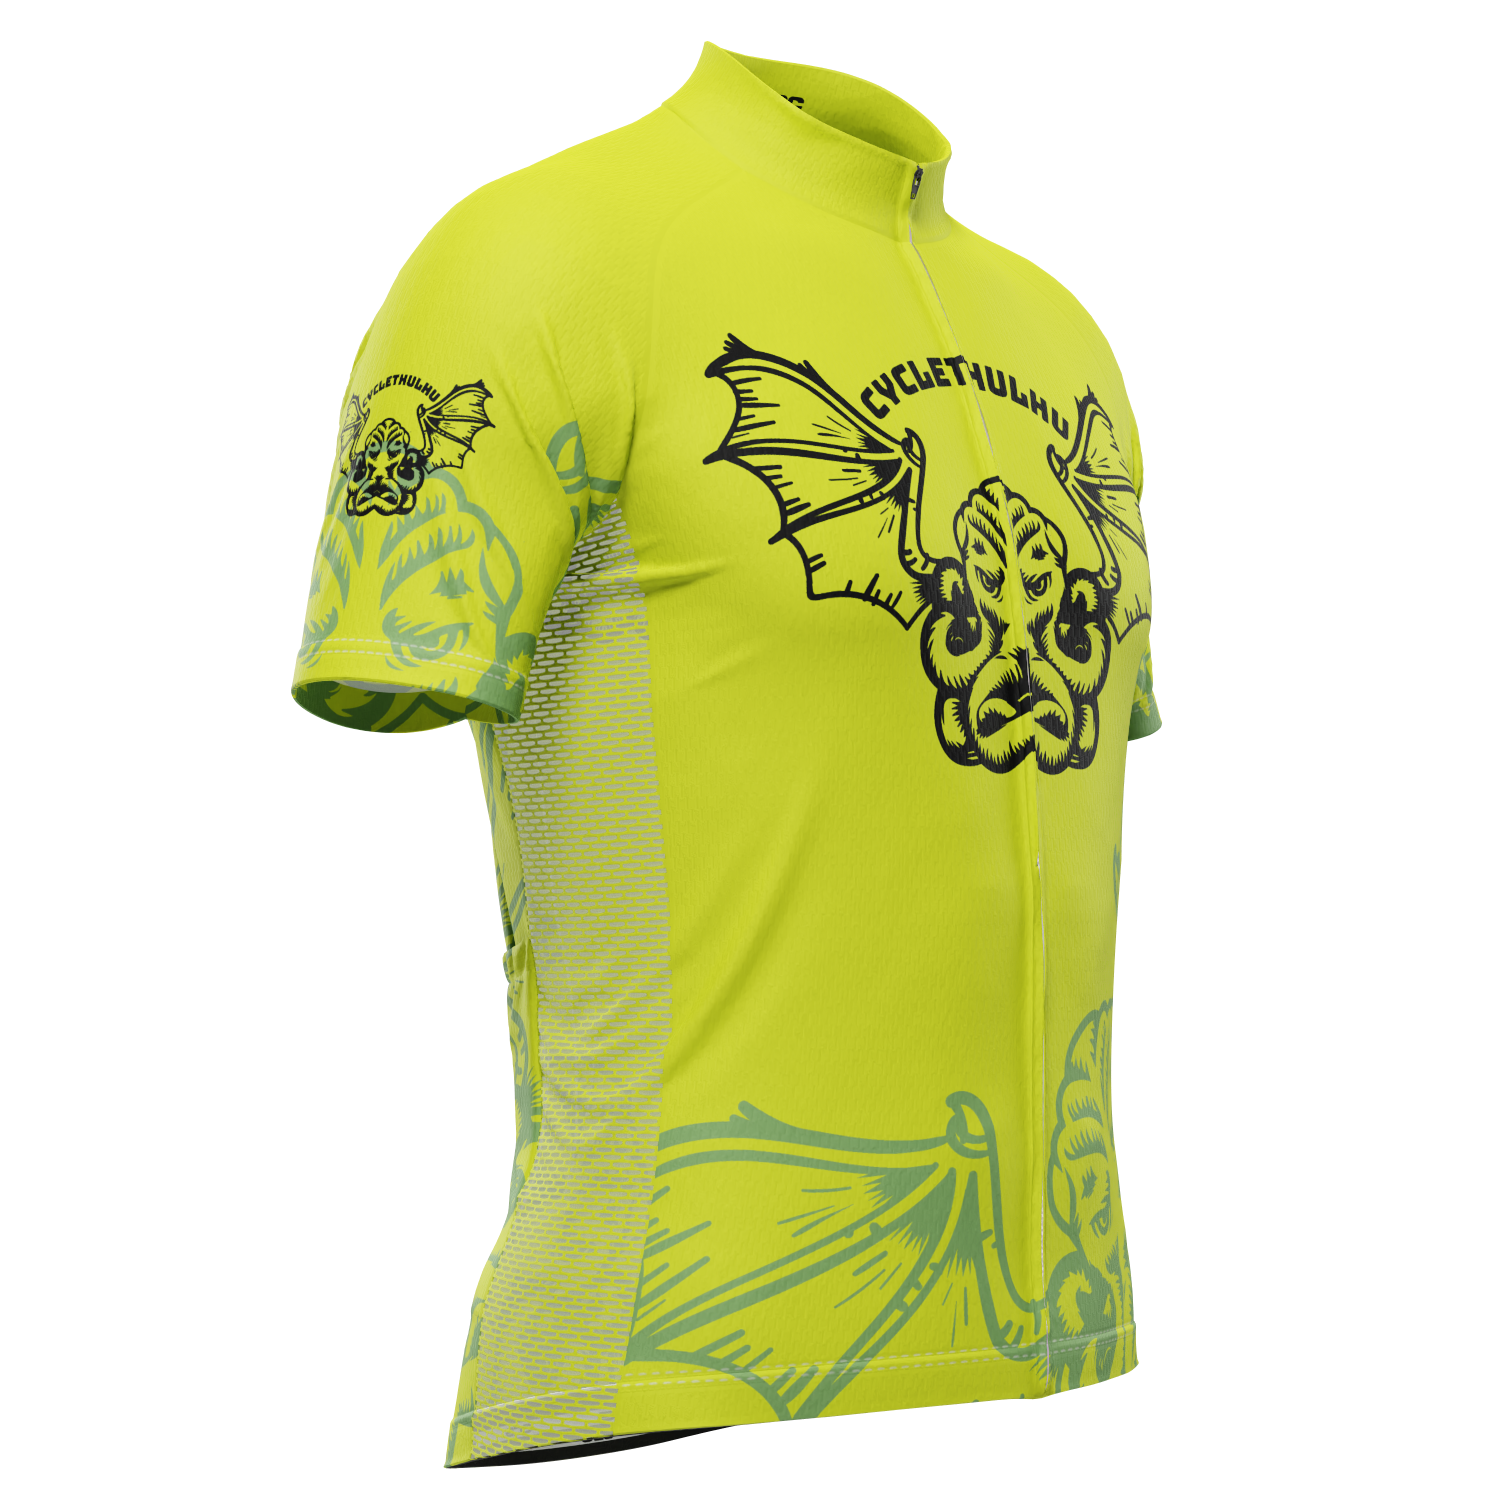 Men's Cyclethulhu Short Sleeve Cycling Jersey